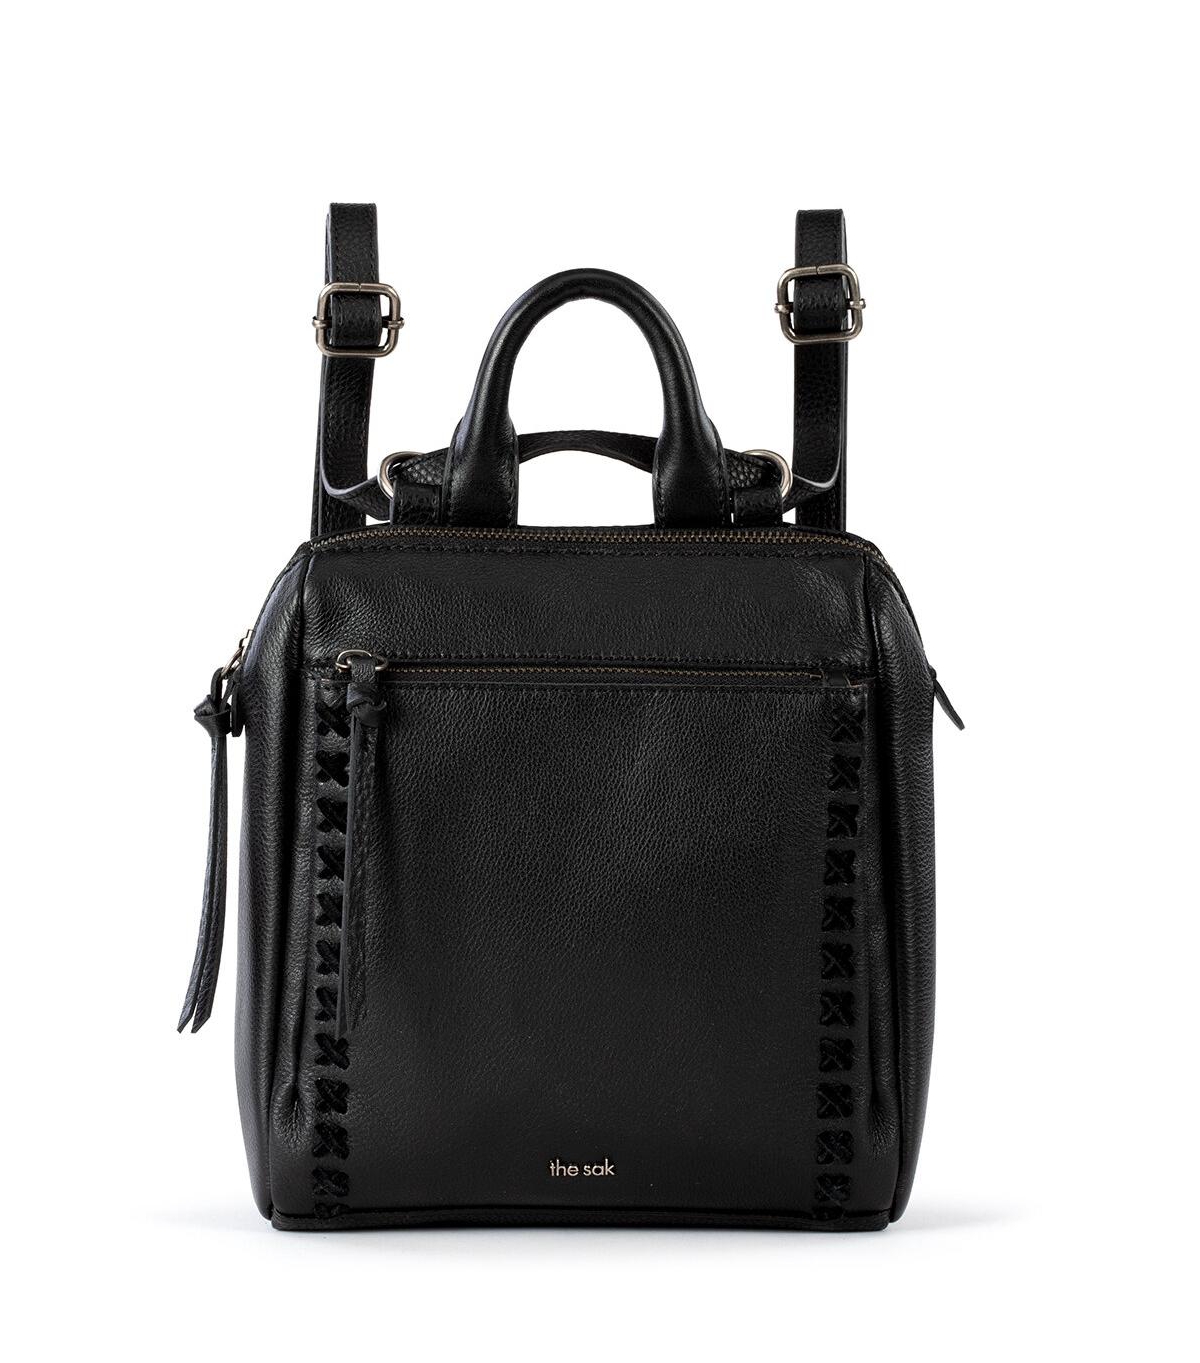 Loyola Convertible Small Leather Backpack - Black